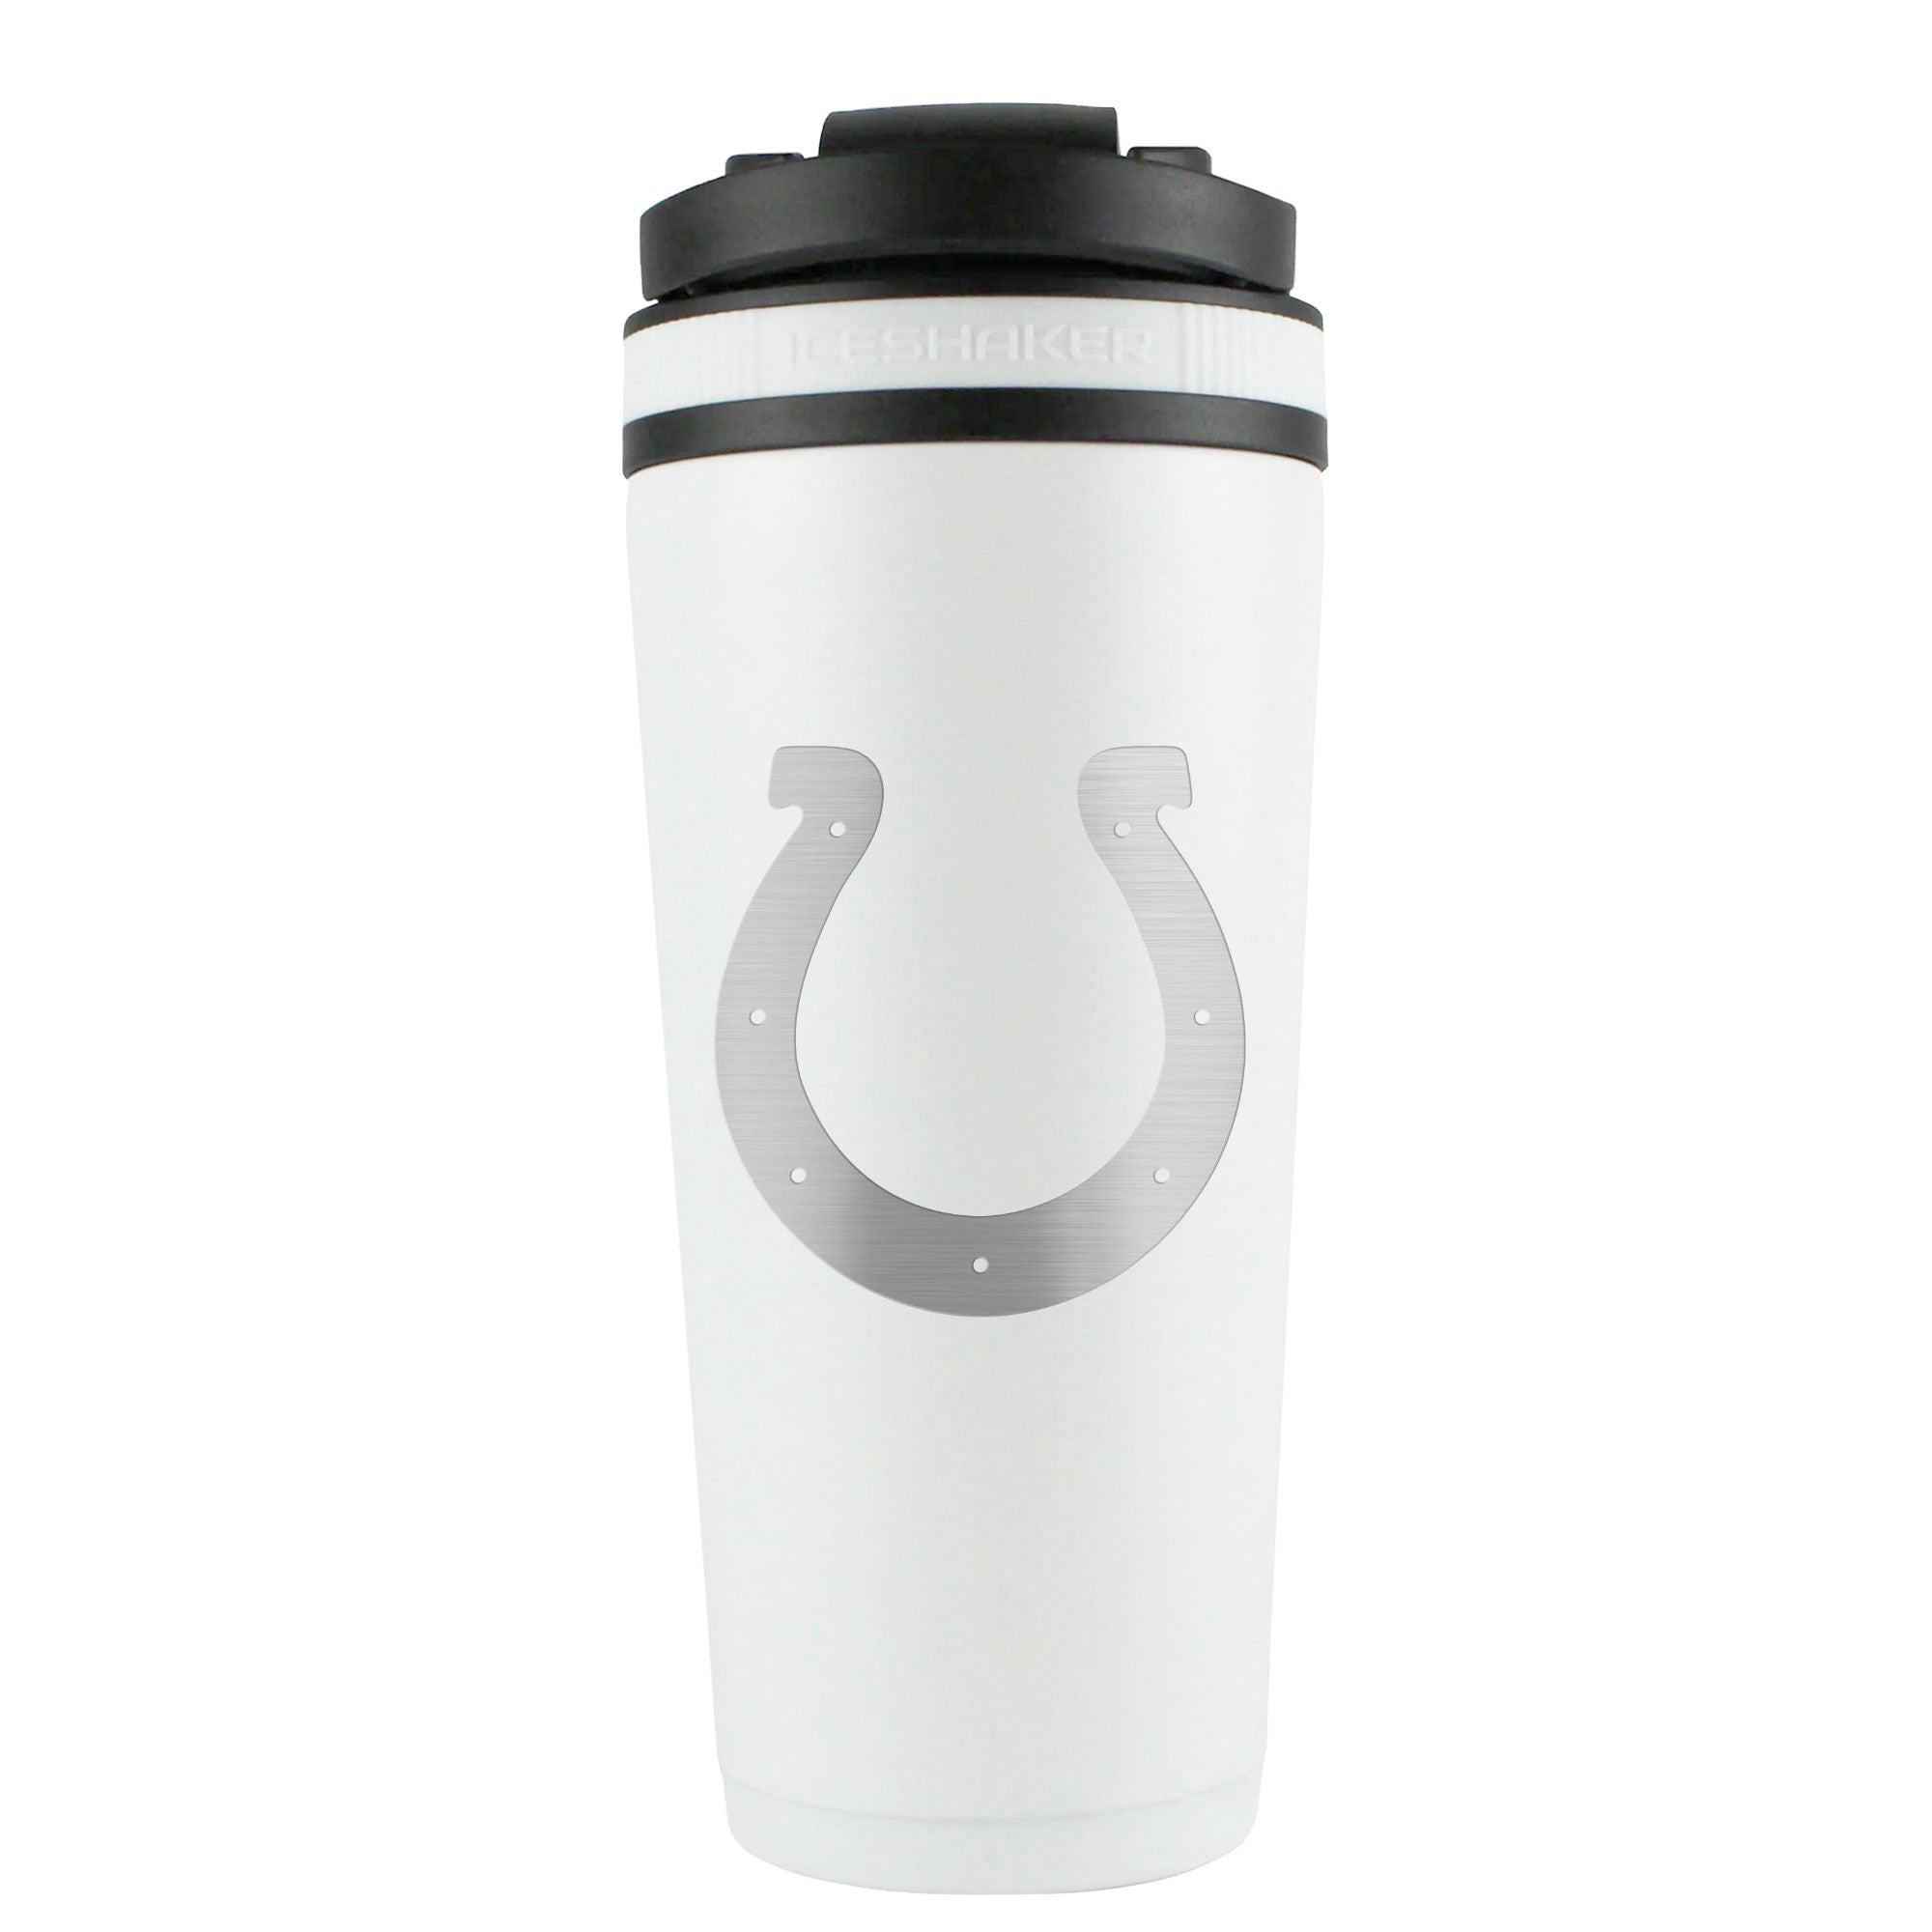 Duck House Sports Colts Water Bottle (LSW102)